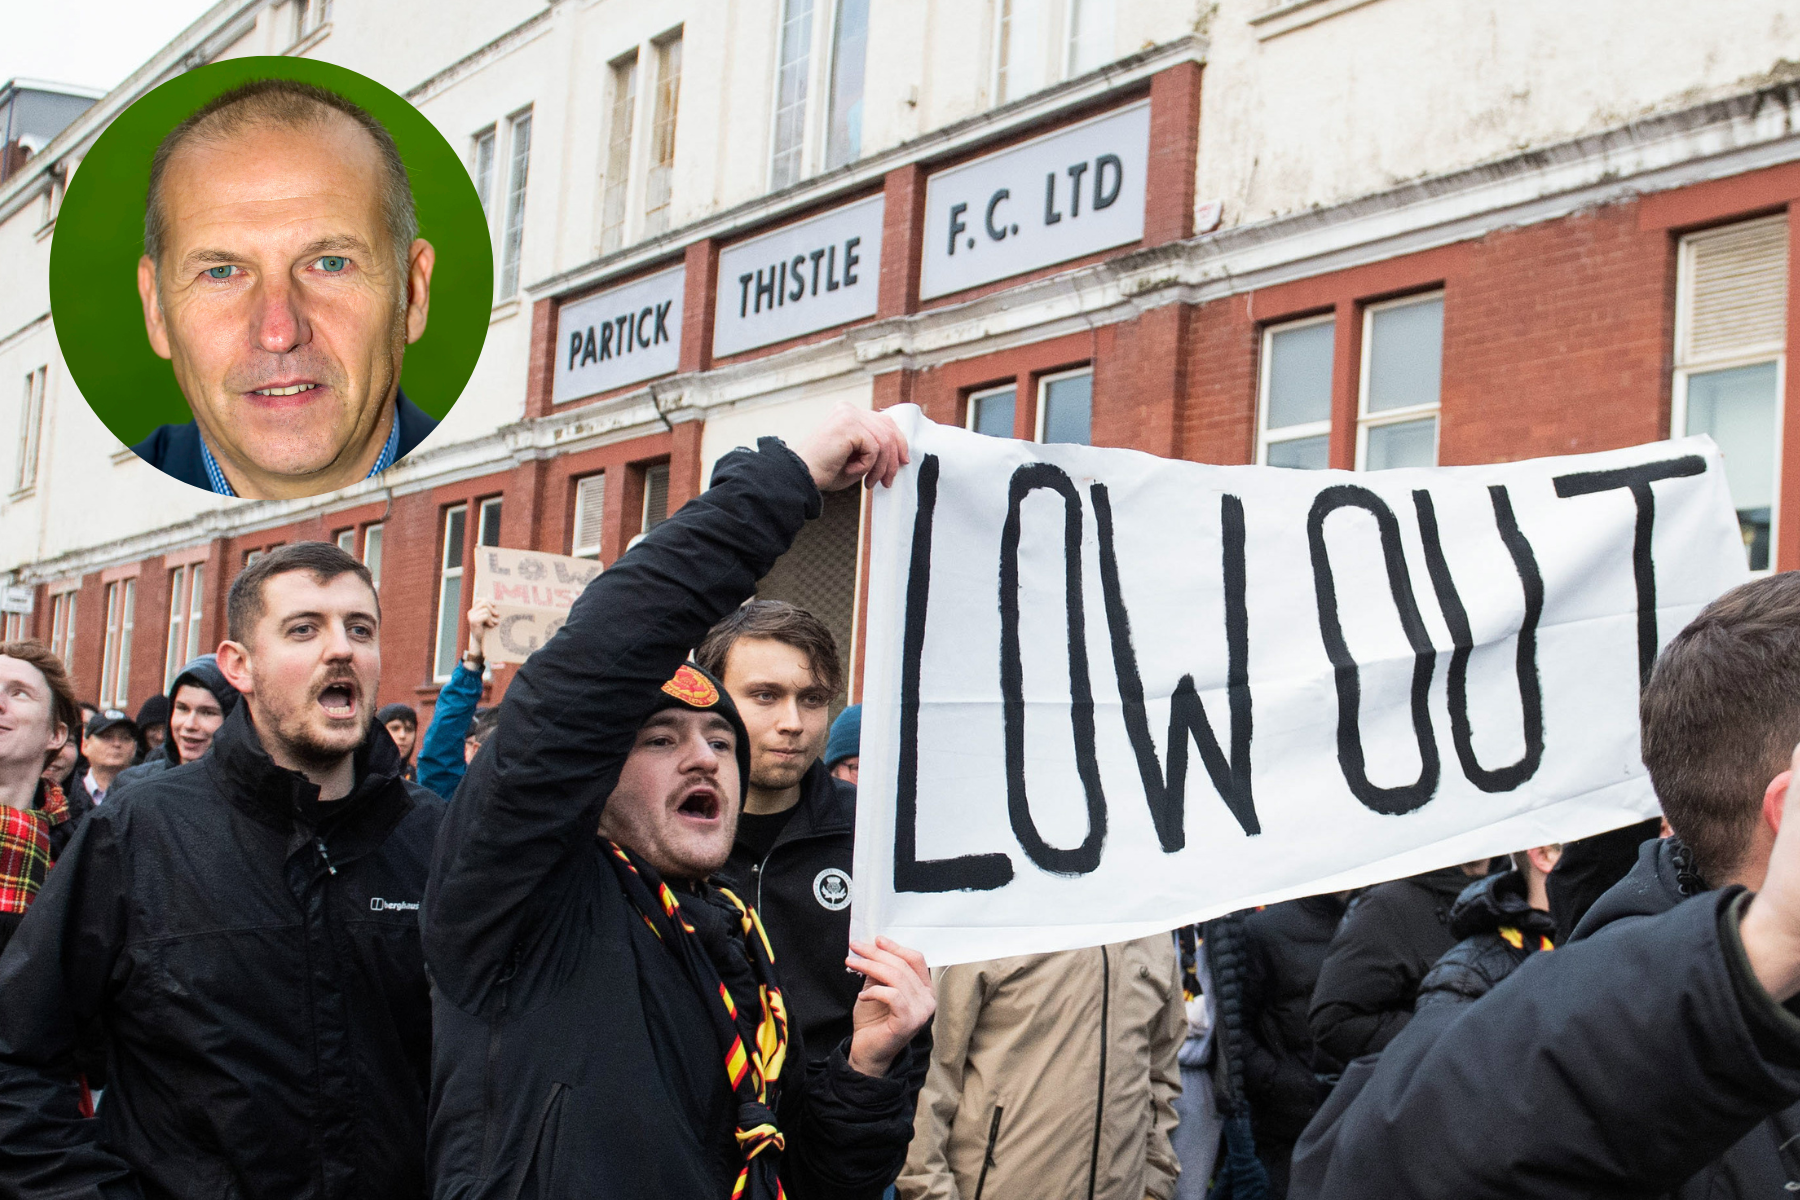 Fan ownership pioneer on how protests sparked a Partick Thistle putsch